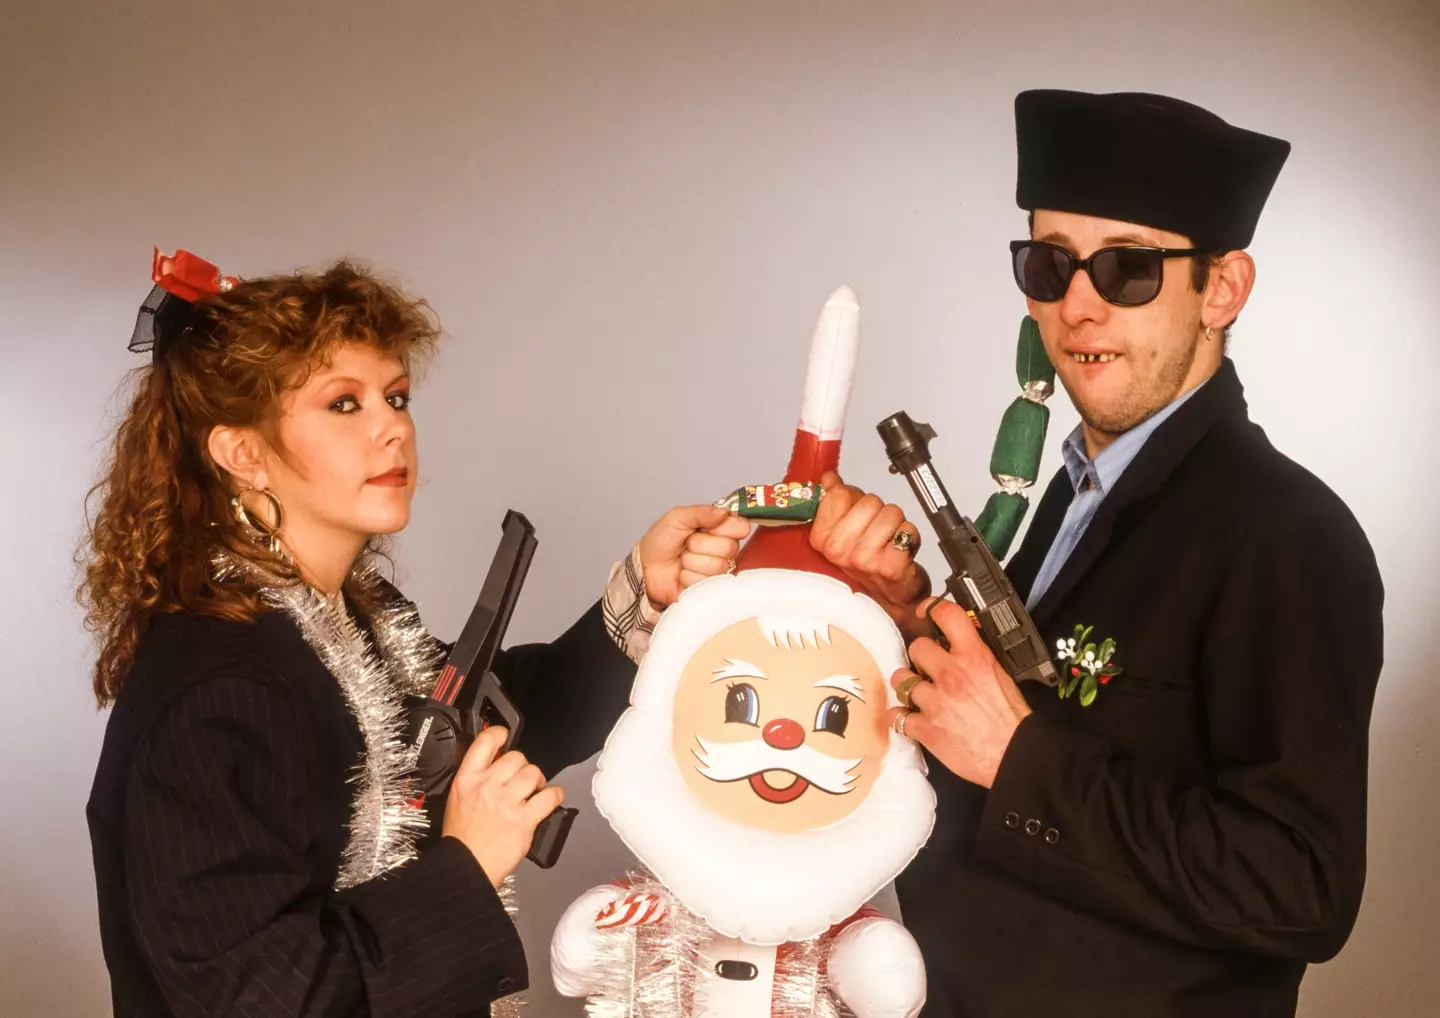 Kirsty MacColl and Shane MacGowan are the voices behind 'Fairytale of New York'.